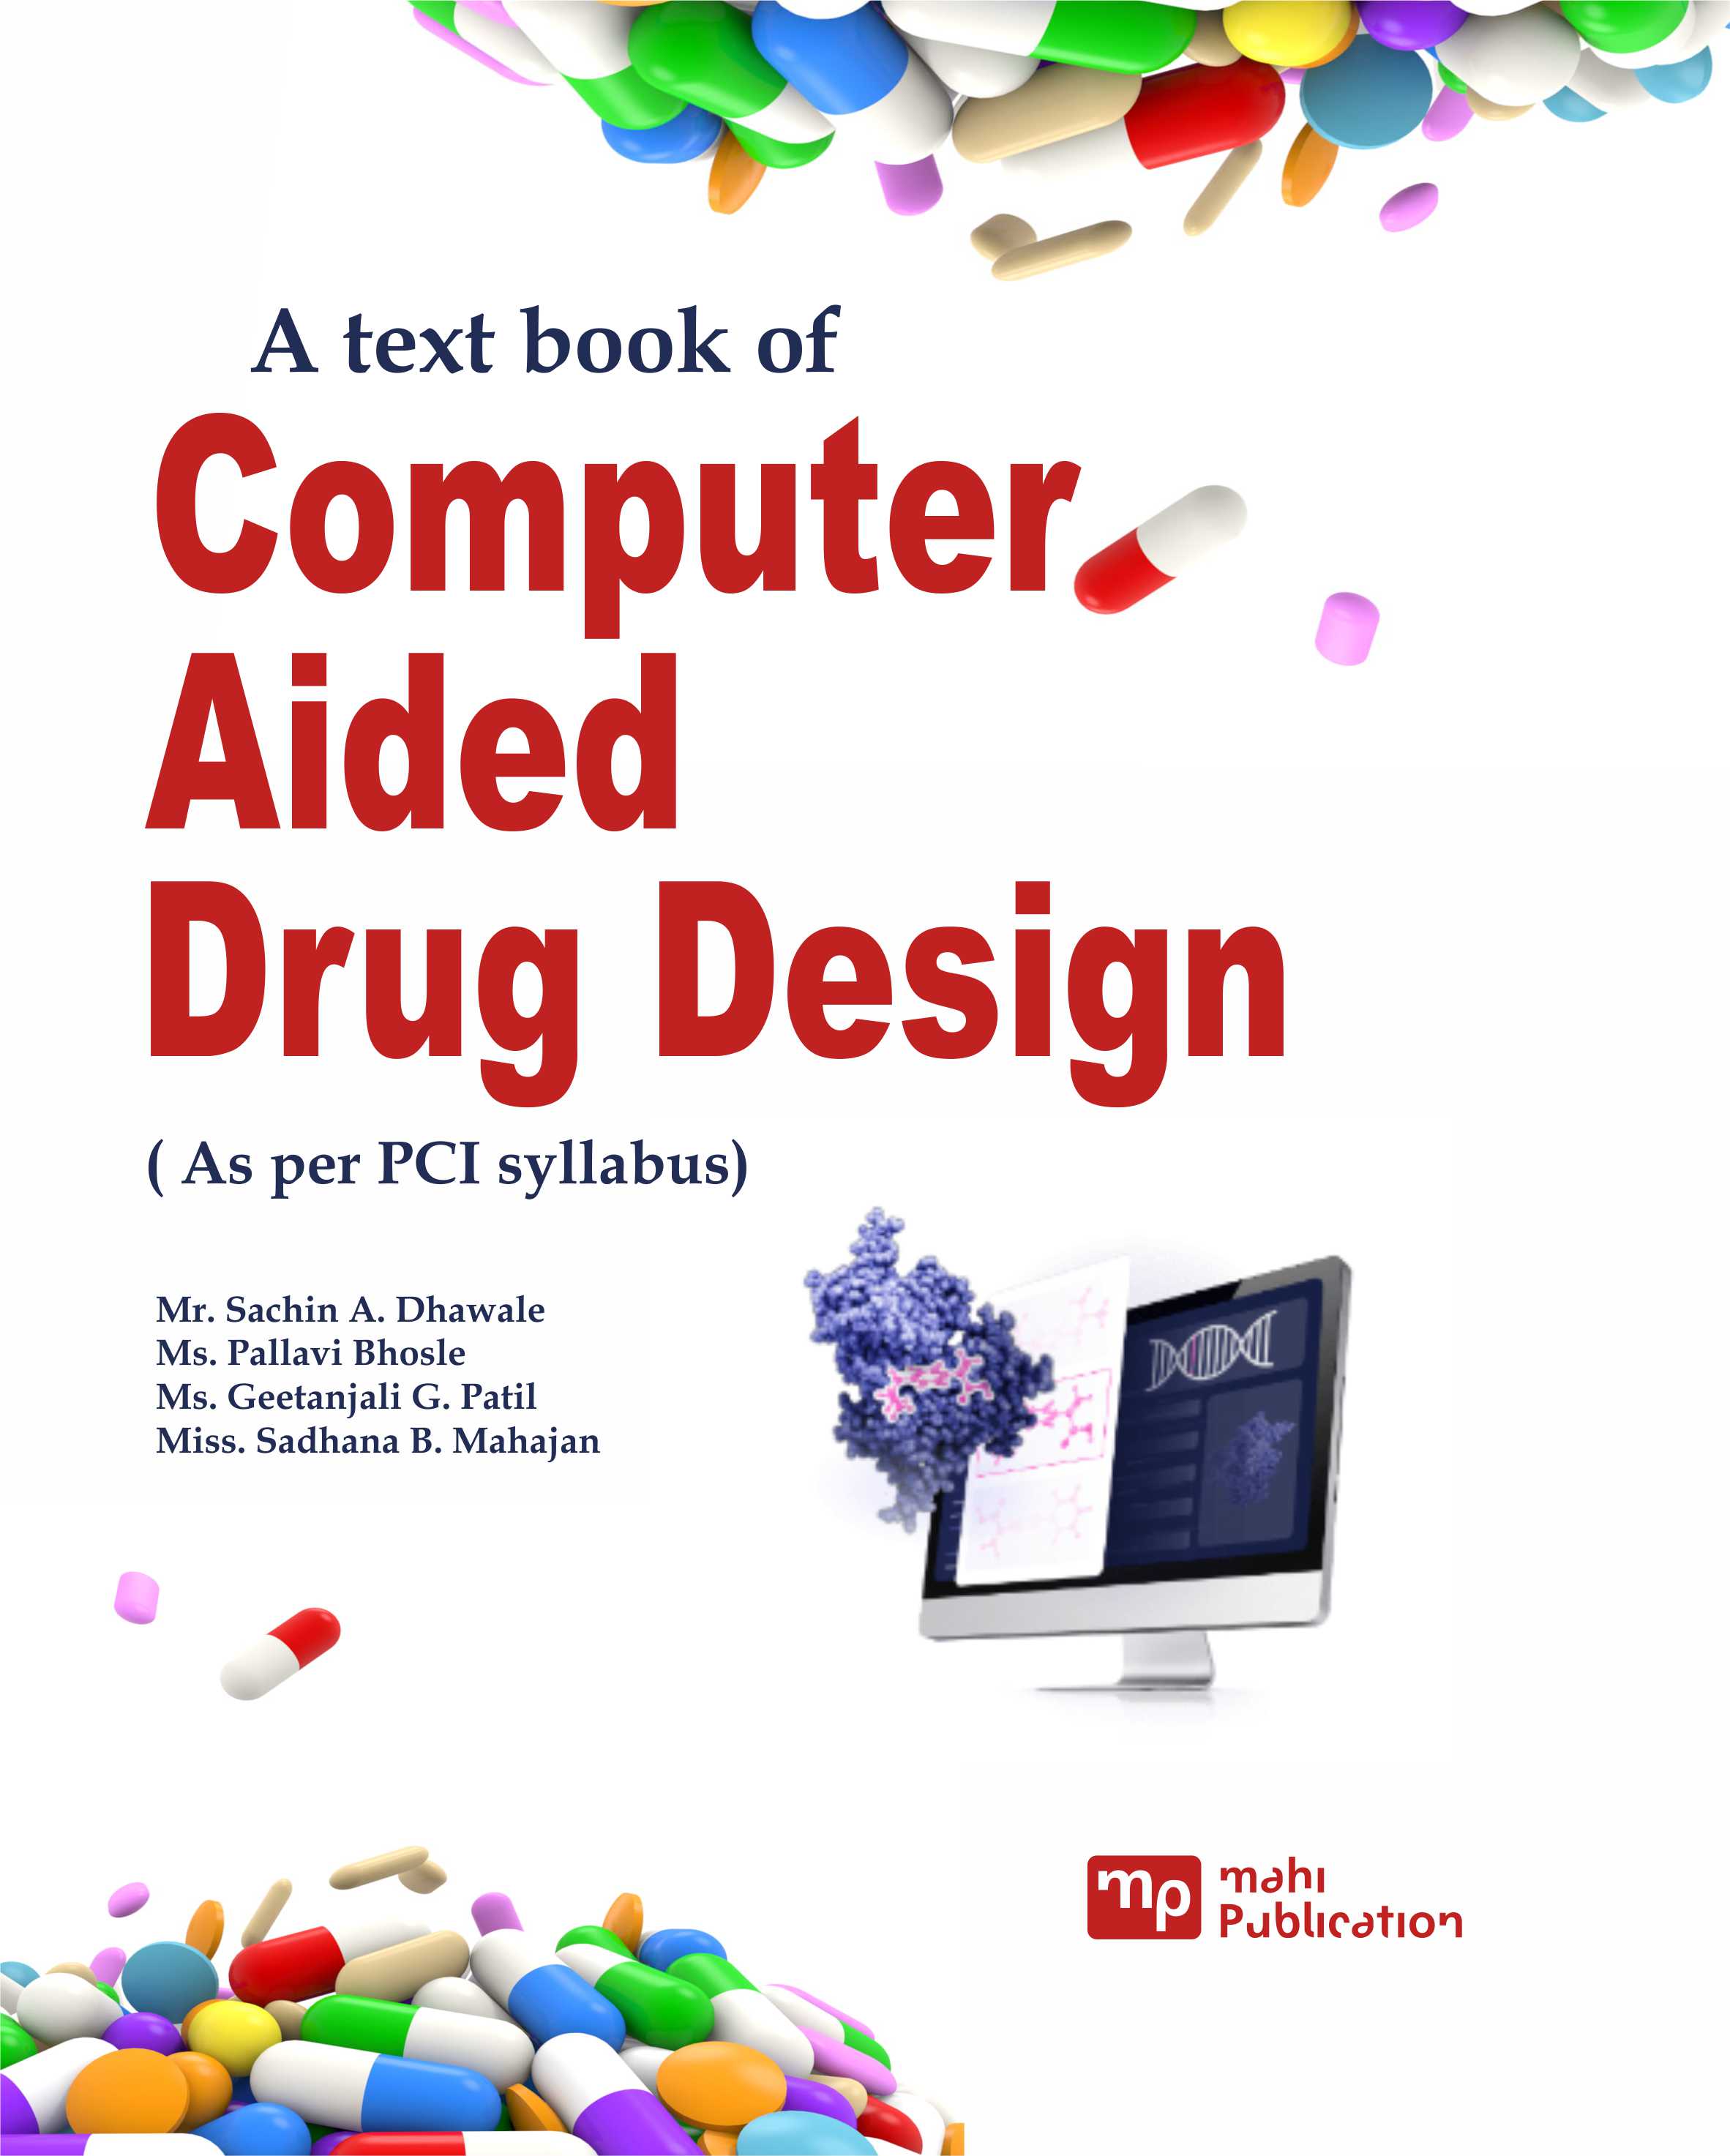 A text book of Computer Aided Drug Design ( As per PCI syllabus)